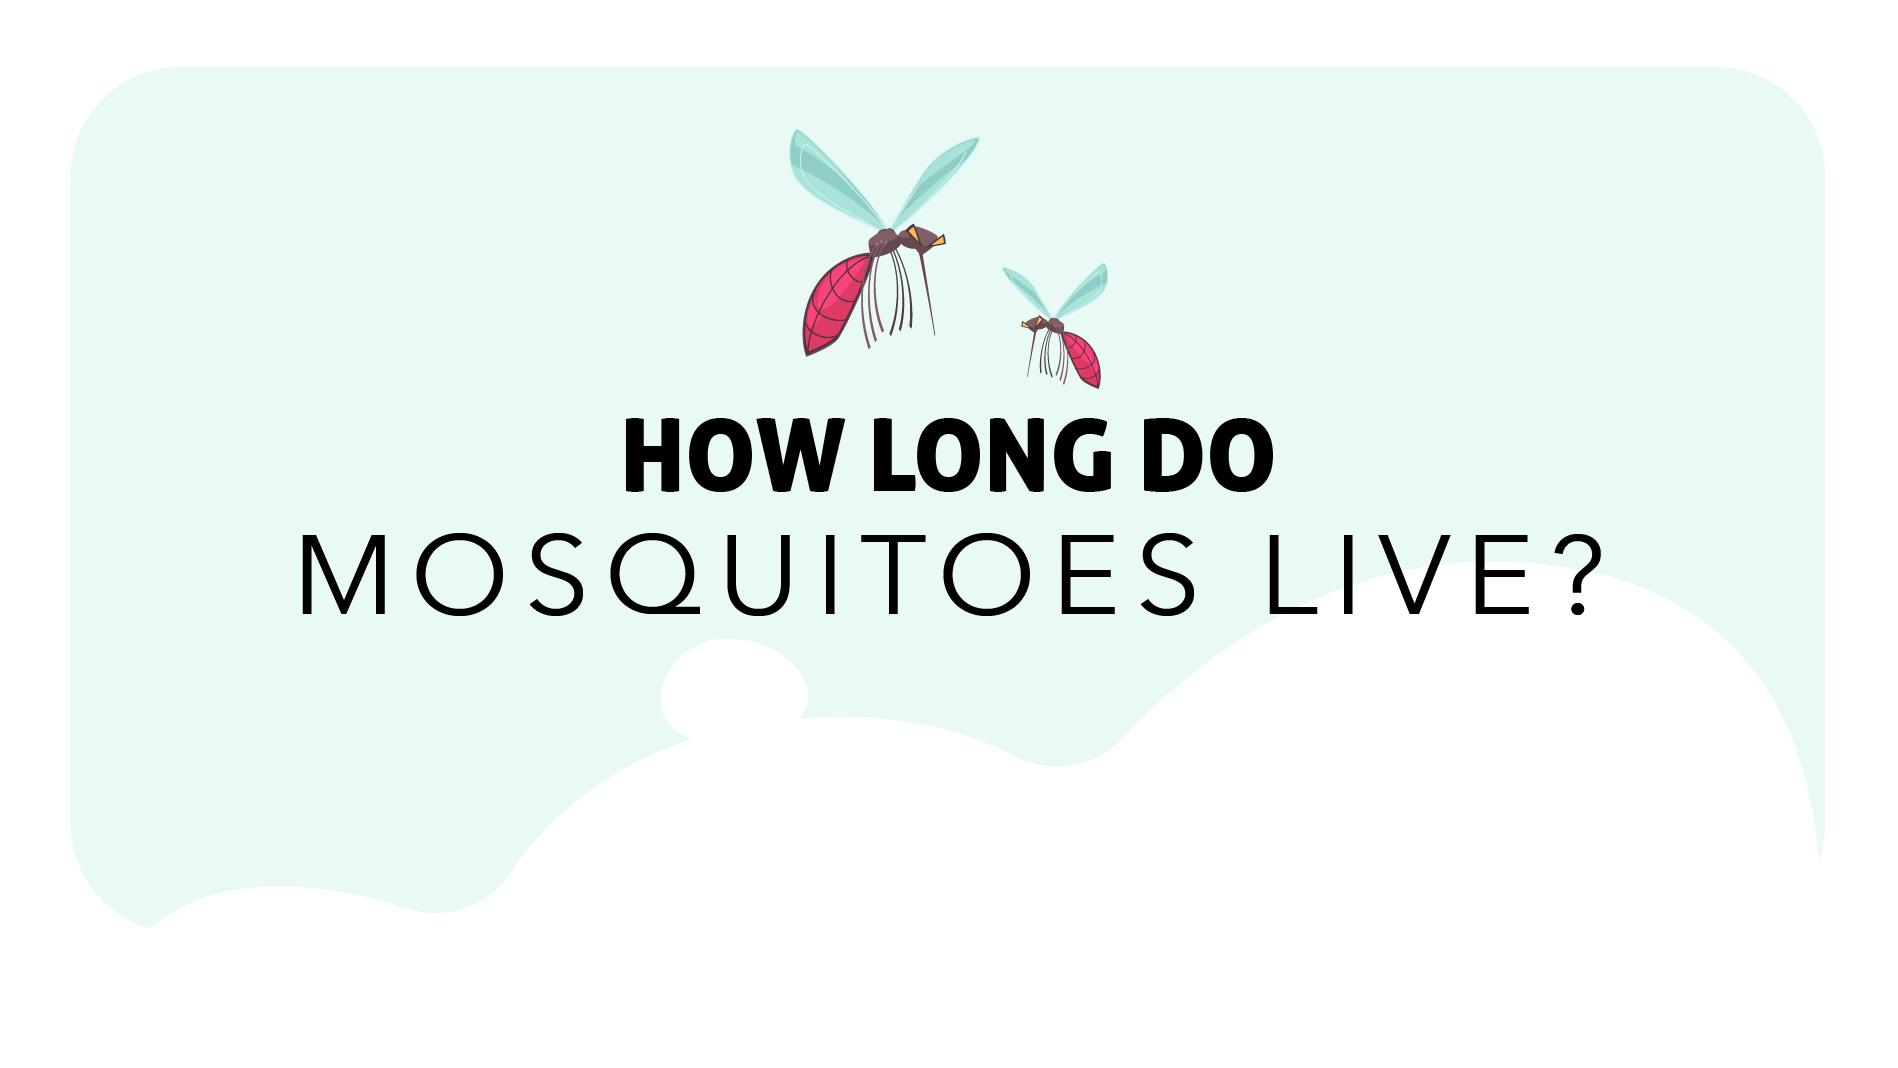 Two mosquitoes flying above "How Long Do Mosquitoes Live"